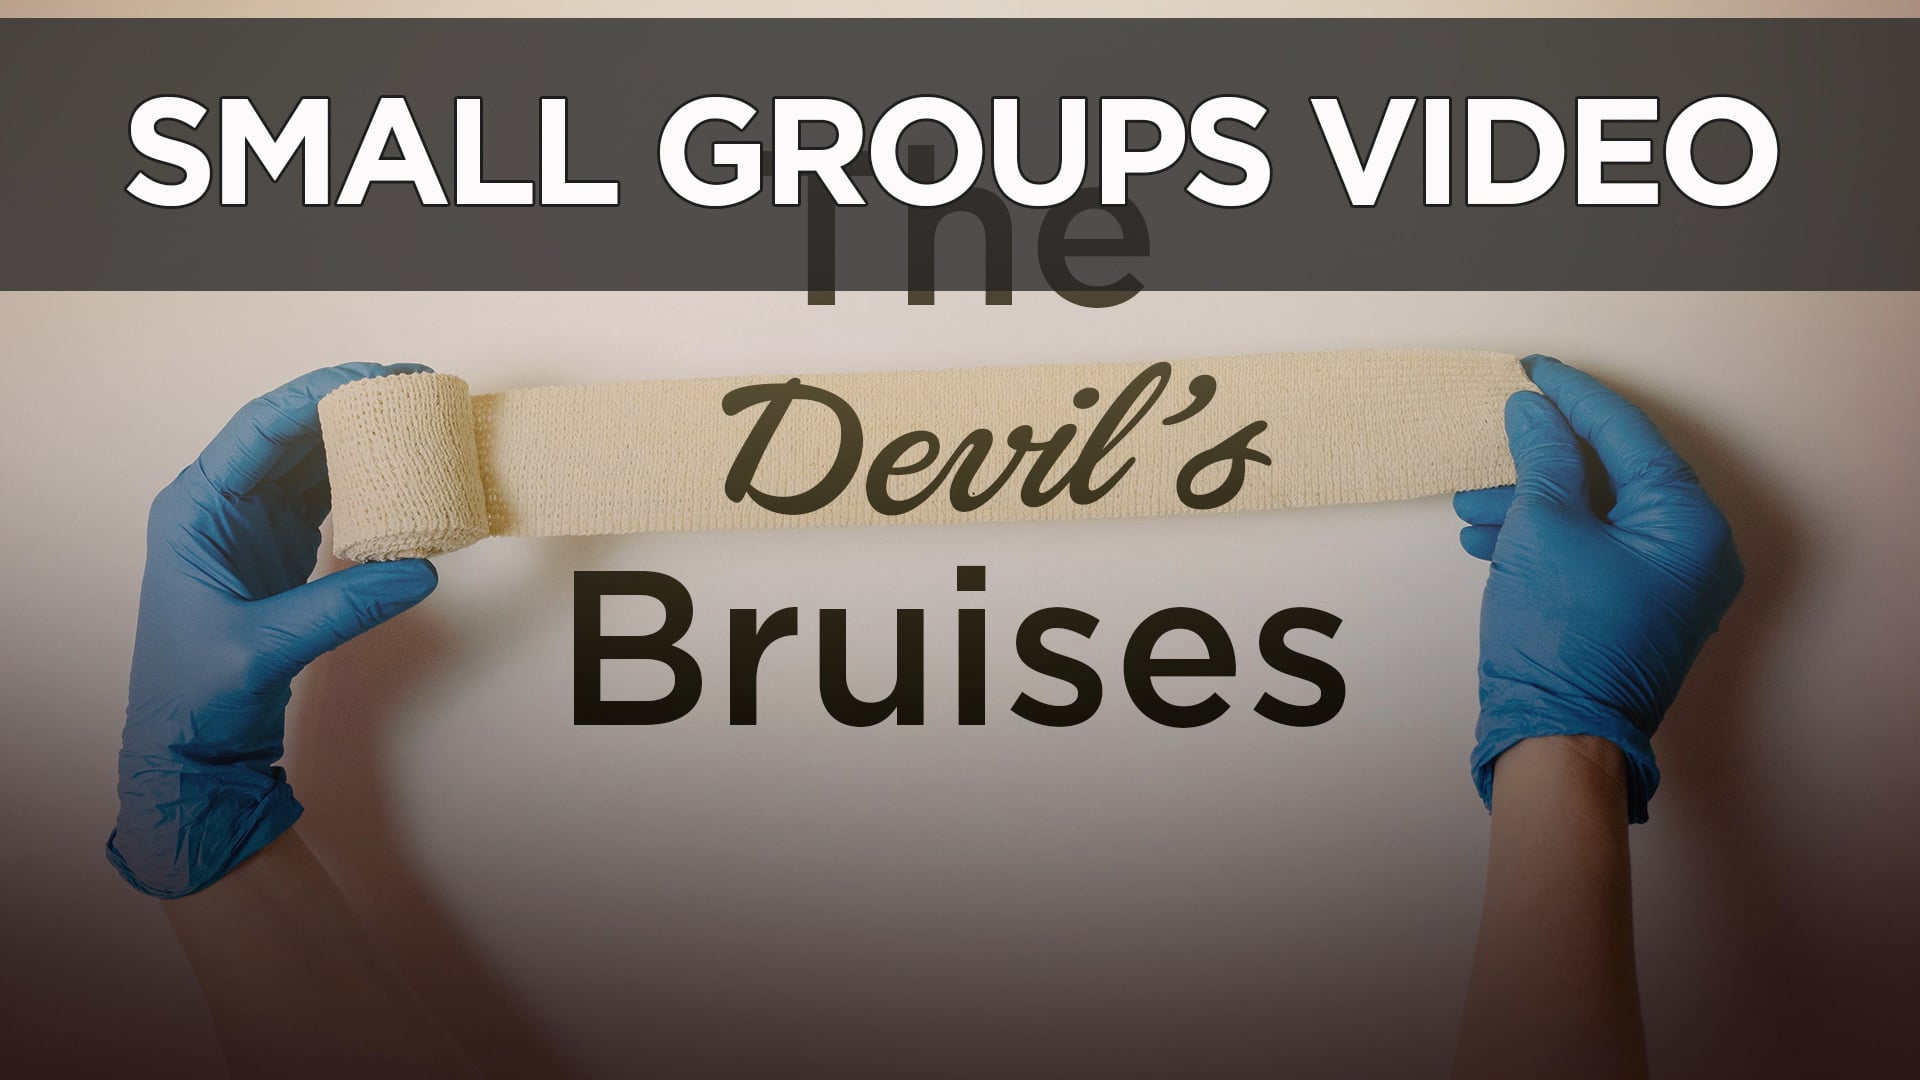 Small Groups Video - The Devil's Bruises